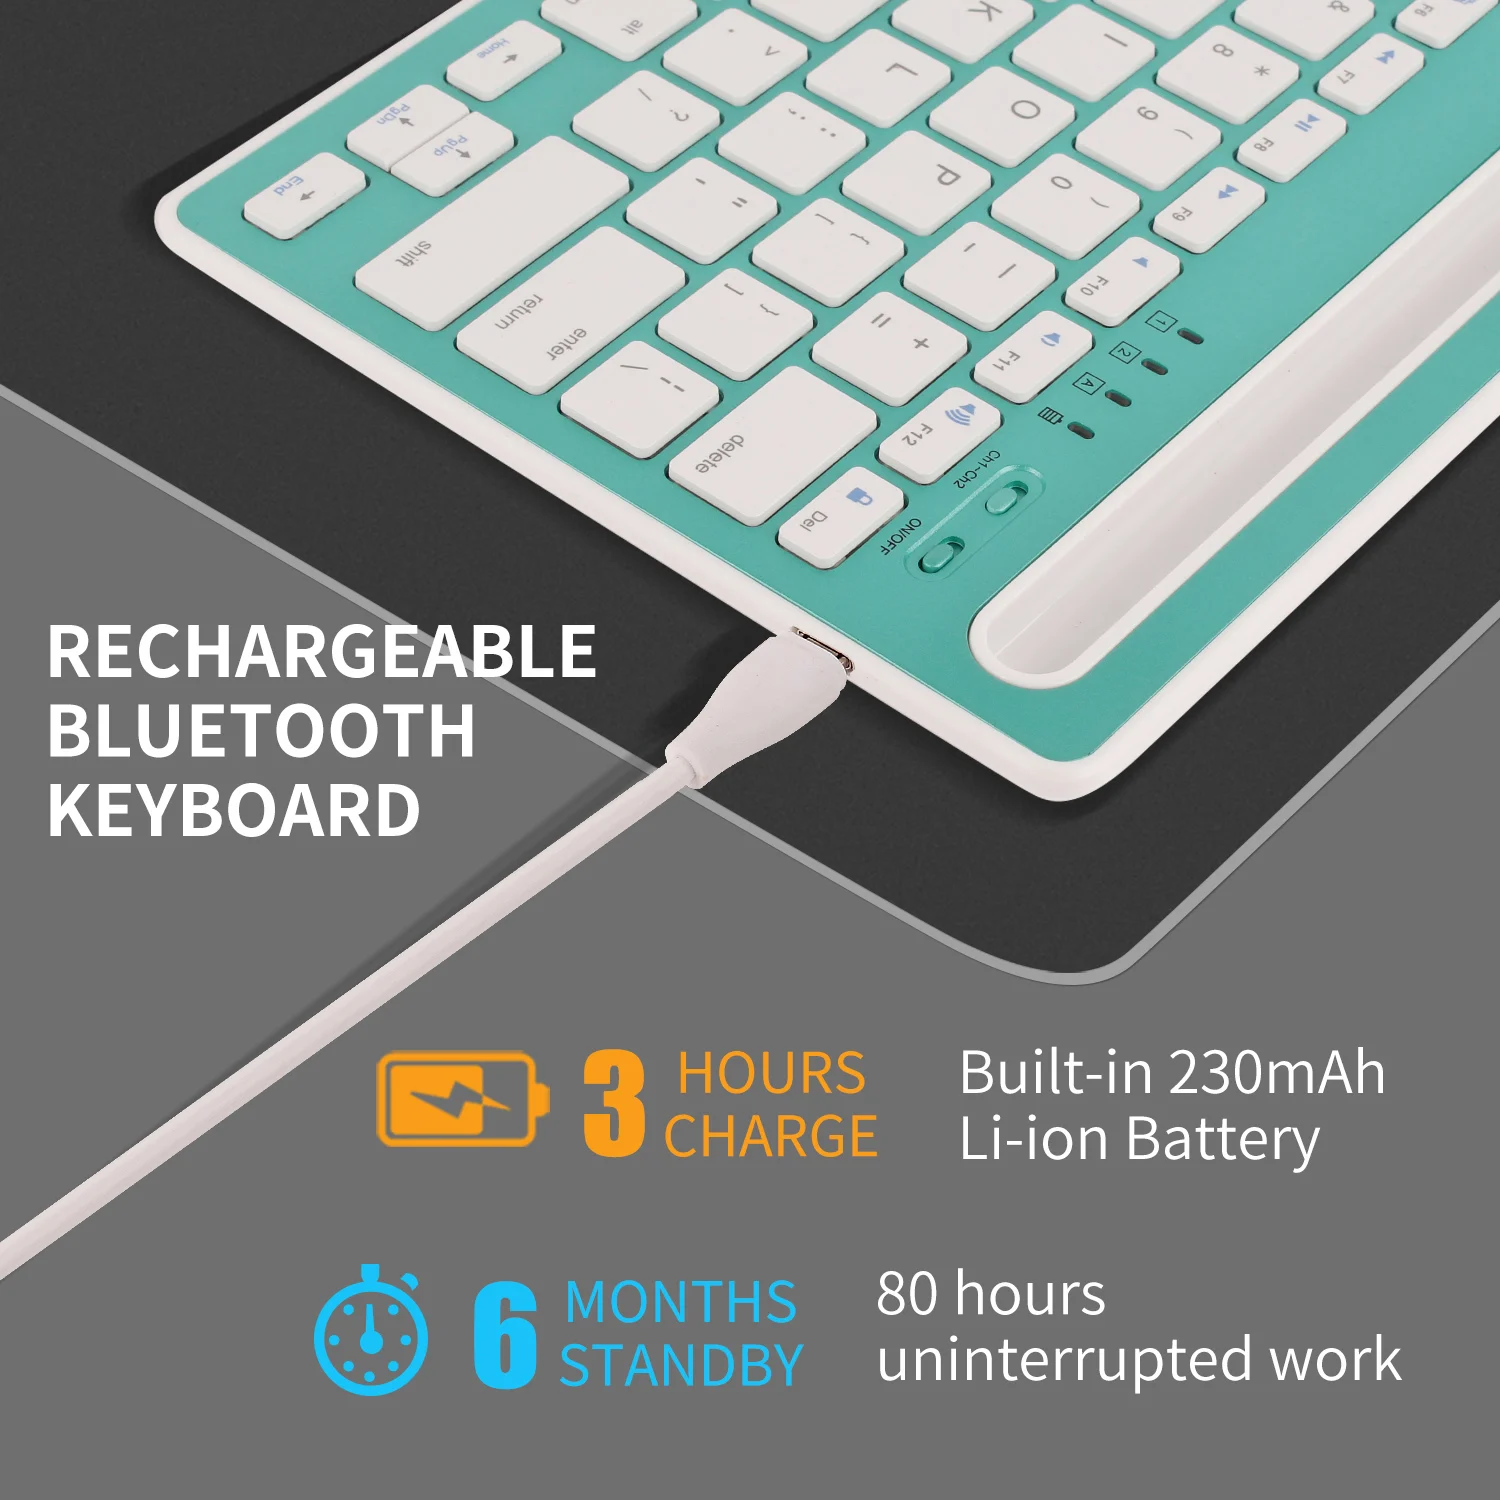 HM-04 Latest Applicable Ipad Android Mobile Phone Desktop Computer Charging Dual Channel Wireless Bluetooth Keyboard Intelligent